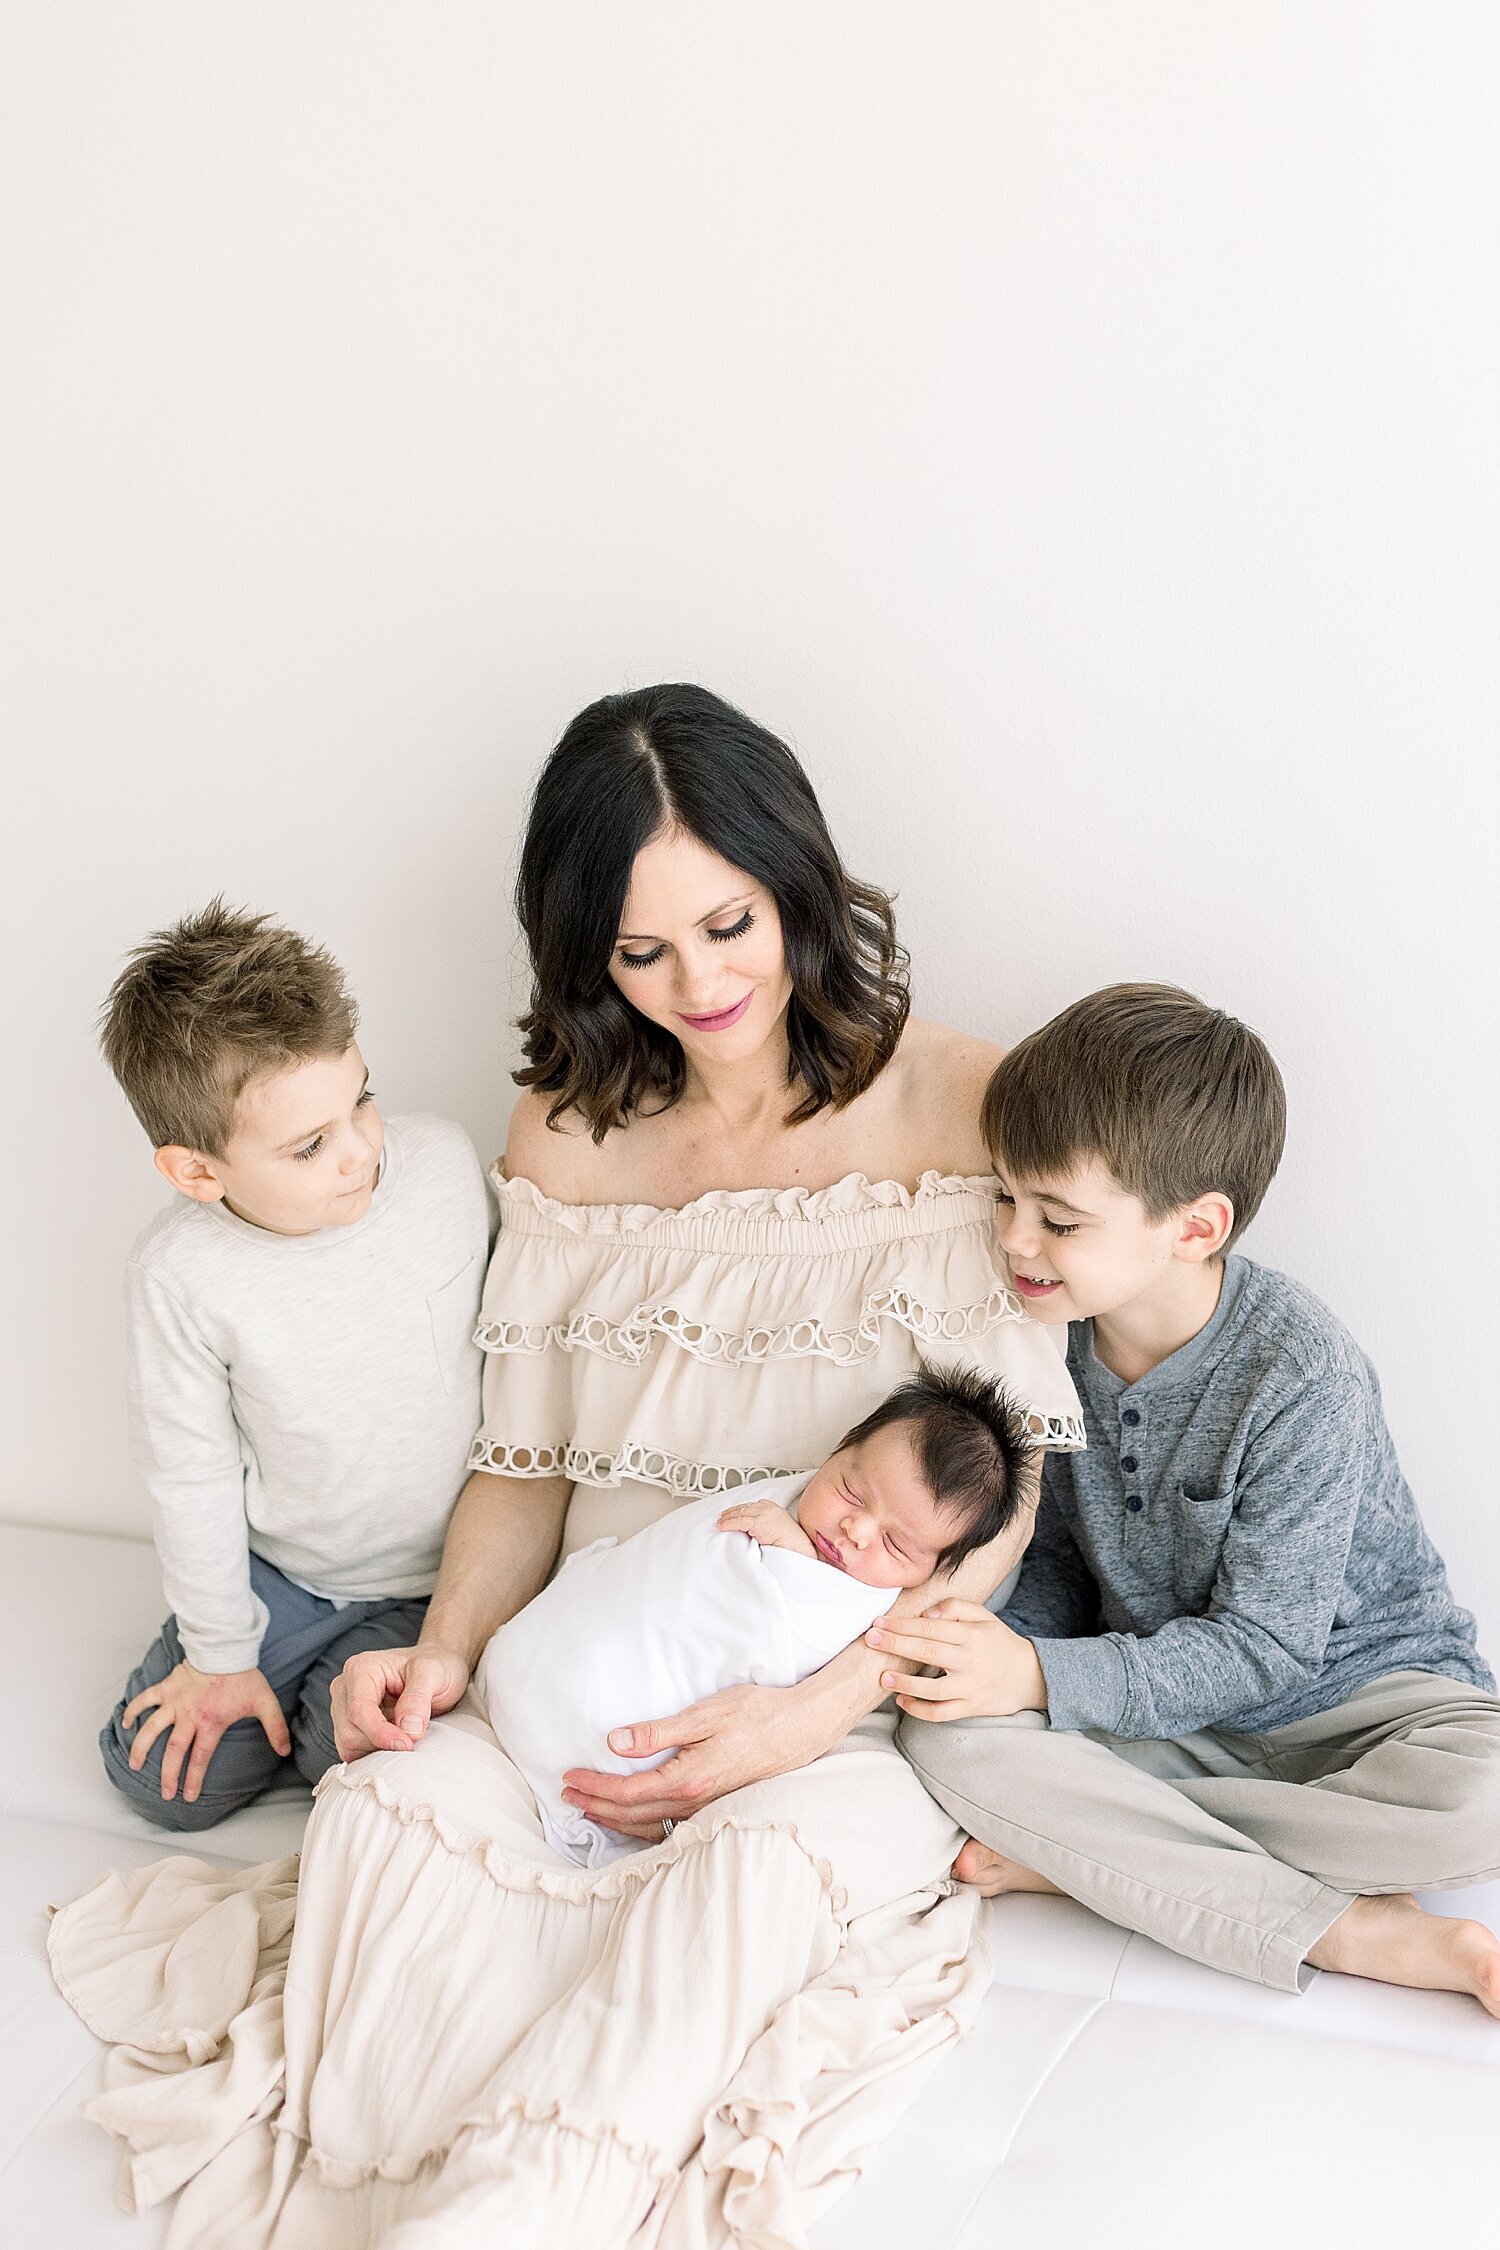 Mom and her three boys sitting on bed during newborn session for youngest baby boy. Photo by Ambre Williams Photography.